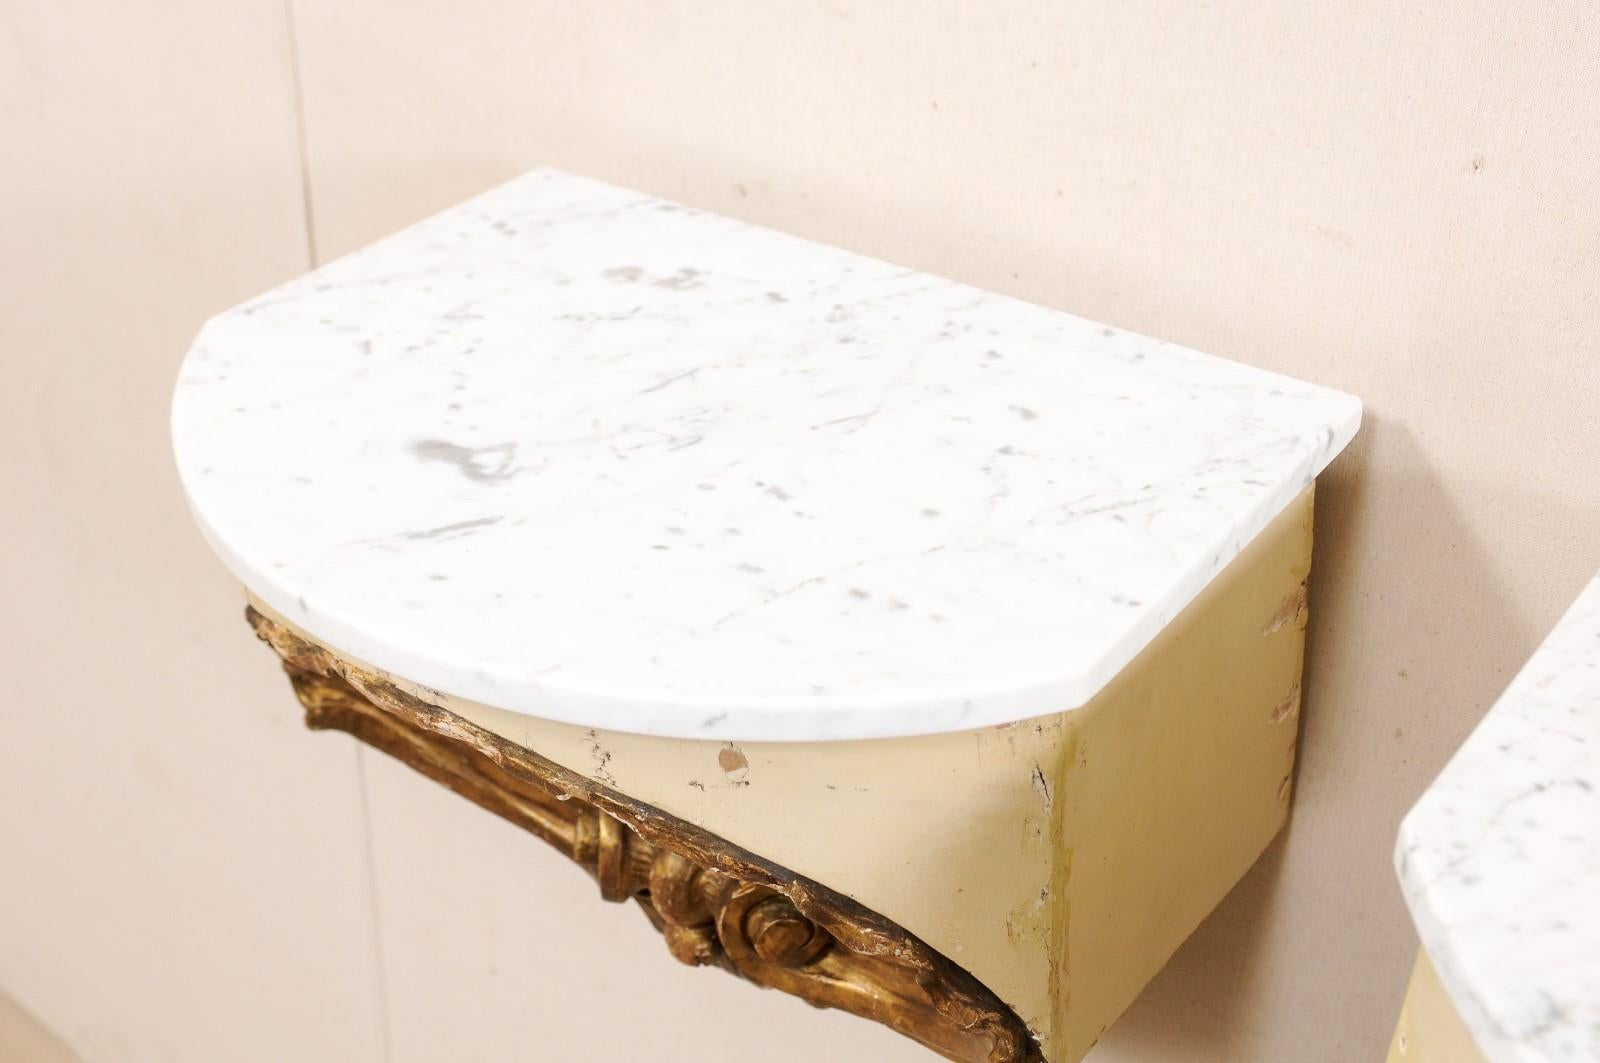 Pair of Early 19th Century Italian Shell Wall-Shelves with Marble Tops In Good Condition For Sale In Atlanta, GA